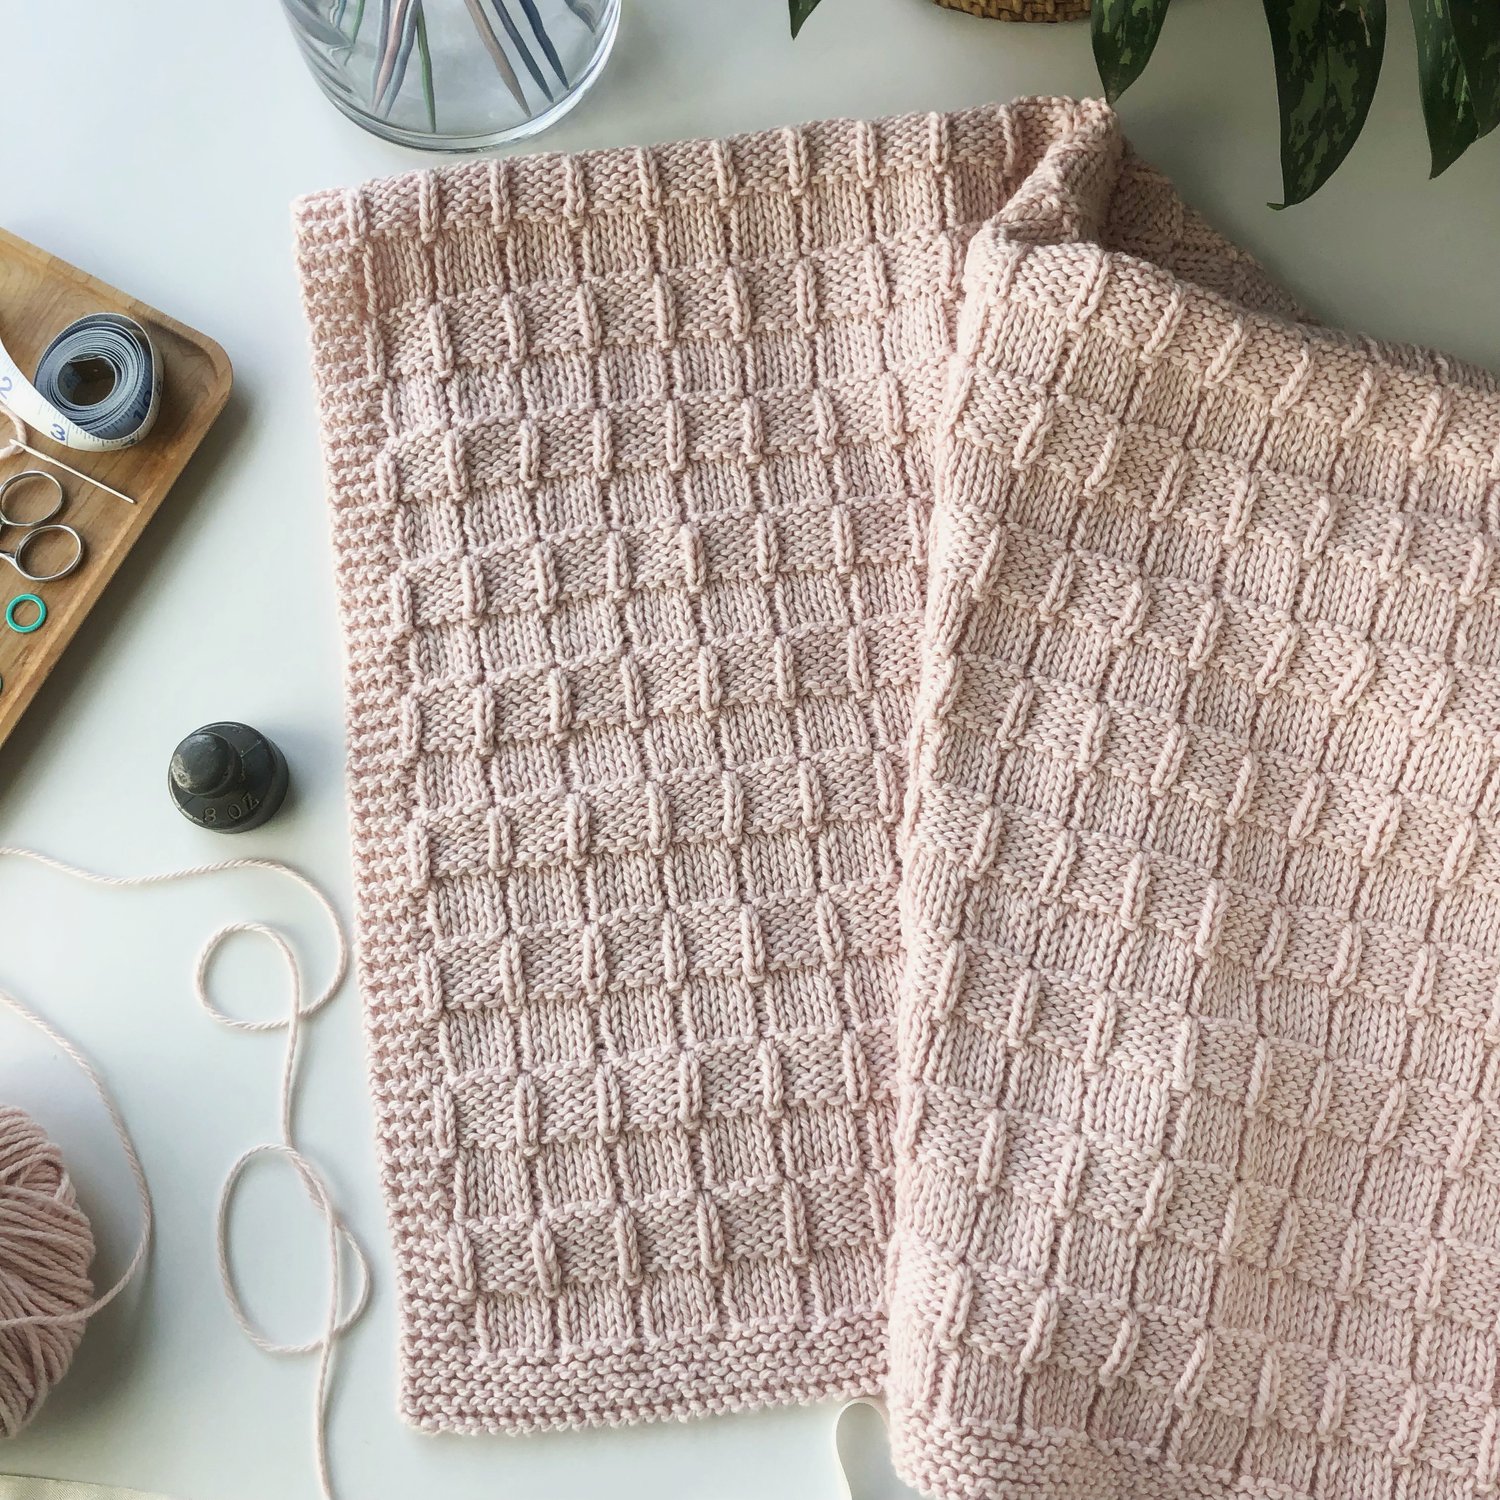 Modern Reversible Blanket Knitting Pattern - Easy to Knit with Worsted #4  Yarn — Fifty Four Ten Studio